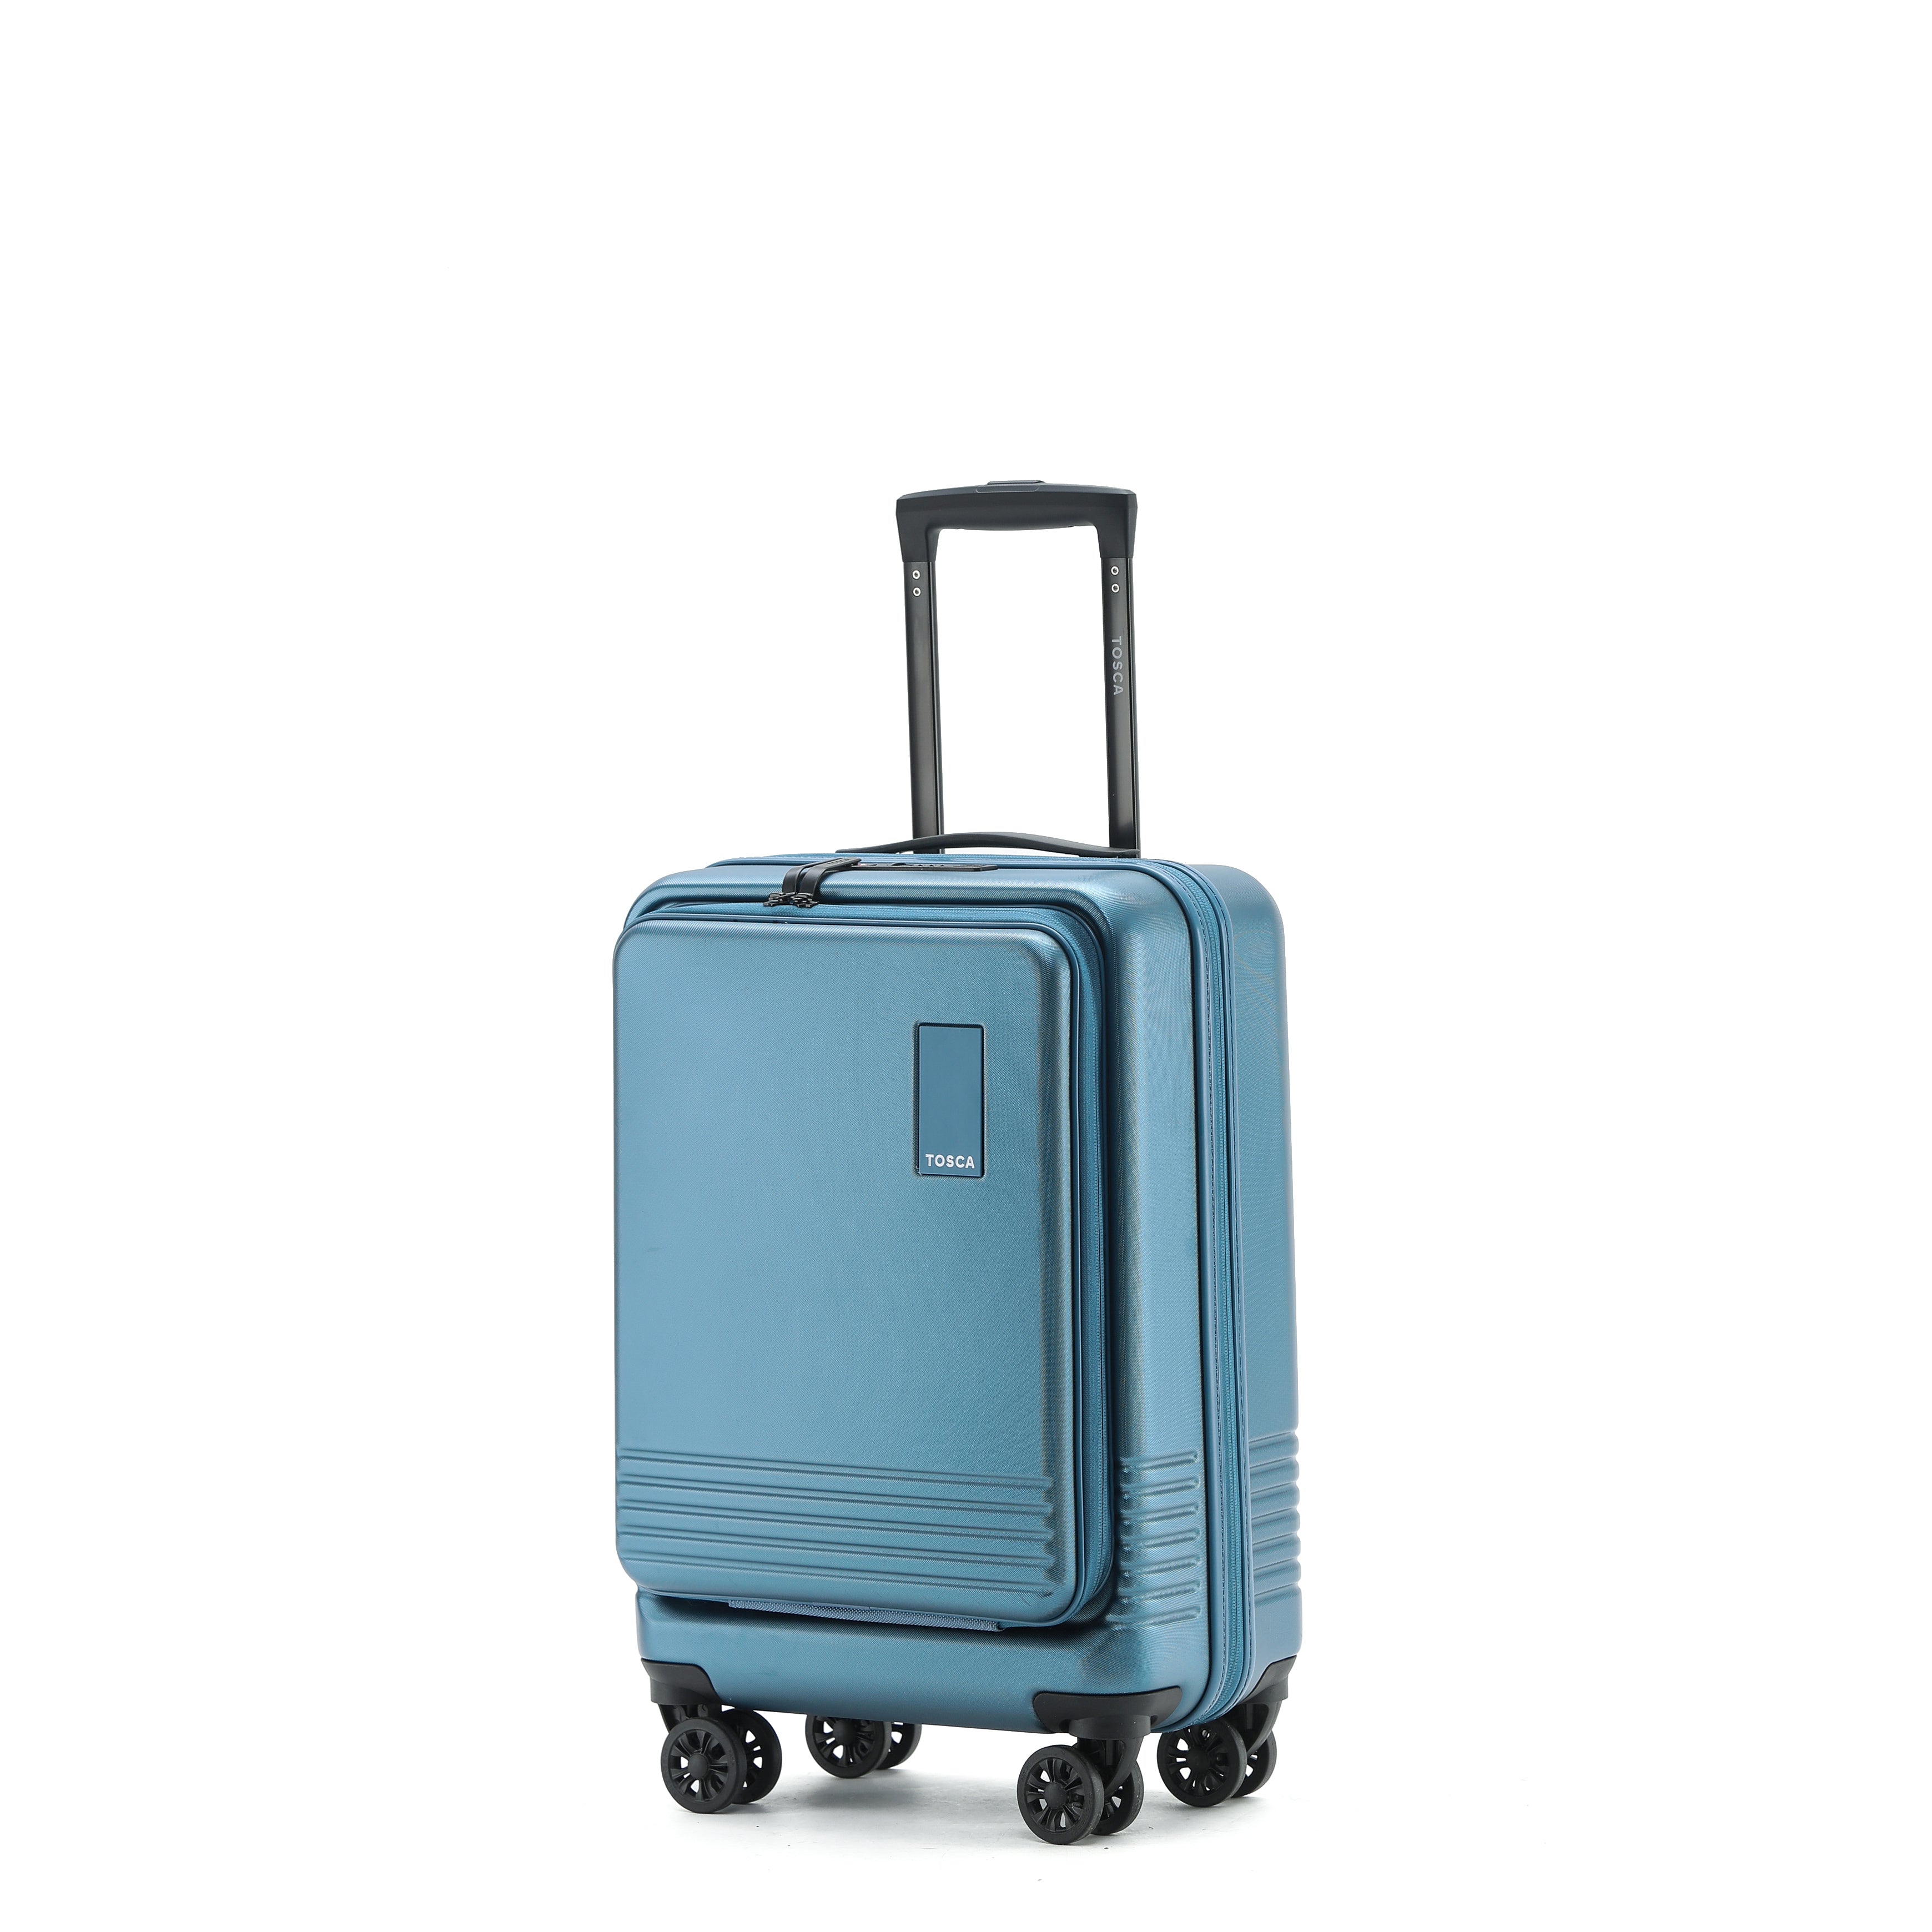 Tosca - TCA644 Horizon Front lid opening Set of 3 suitcases - Blue-9